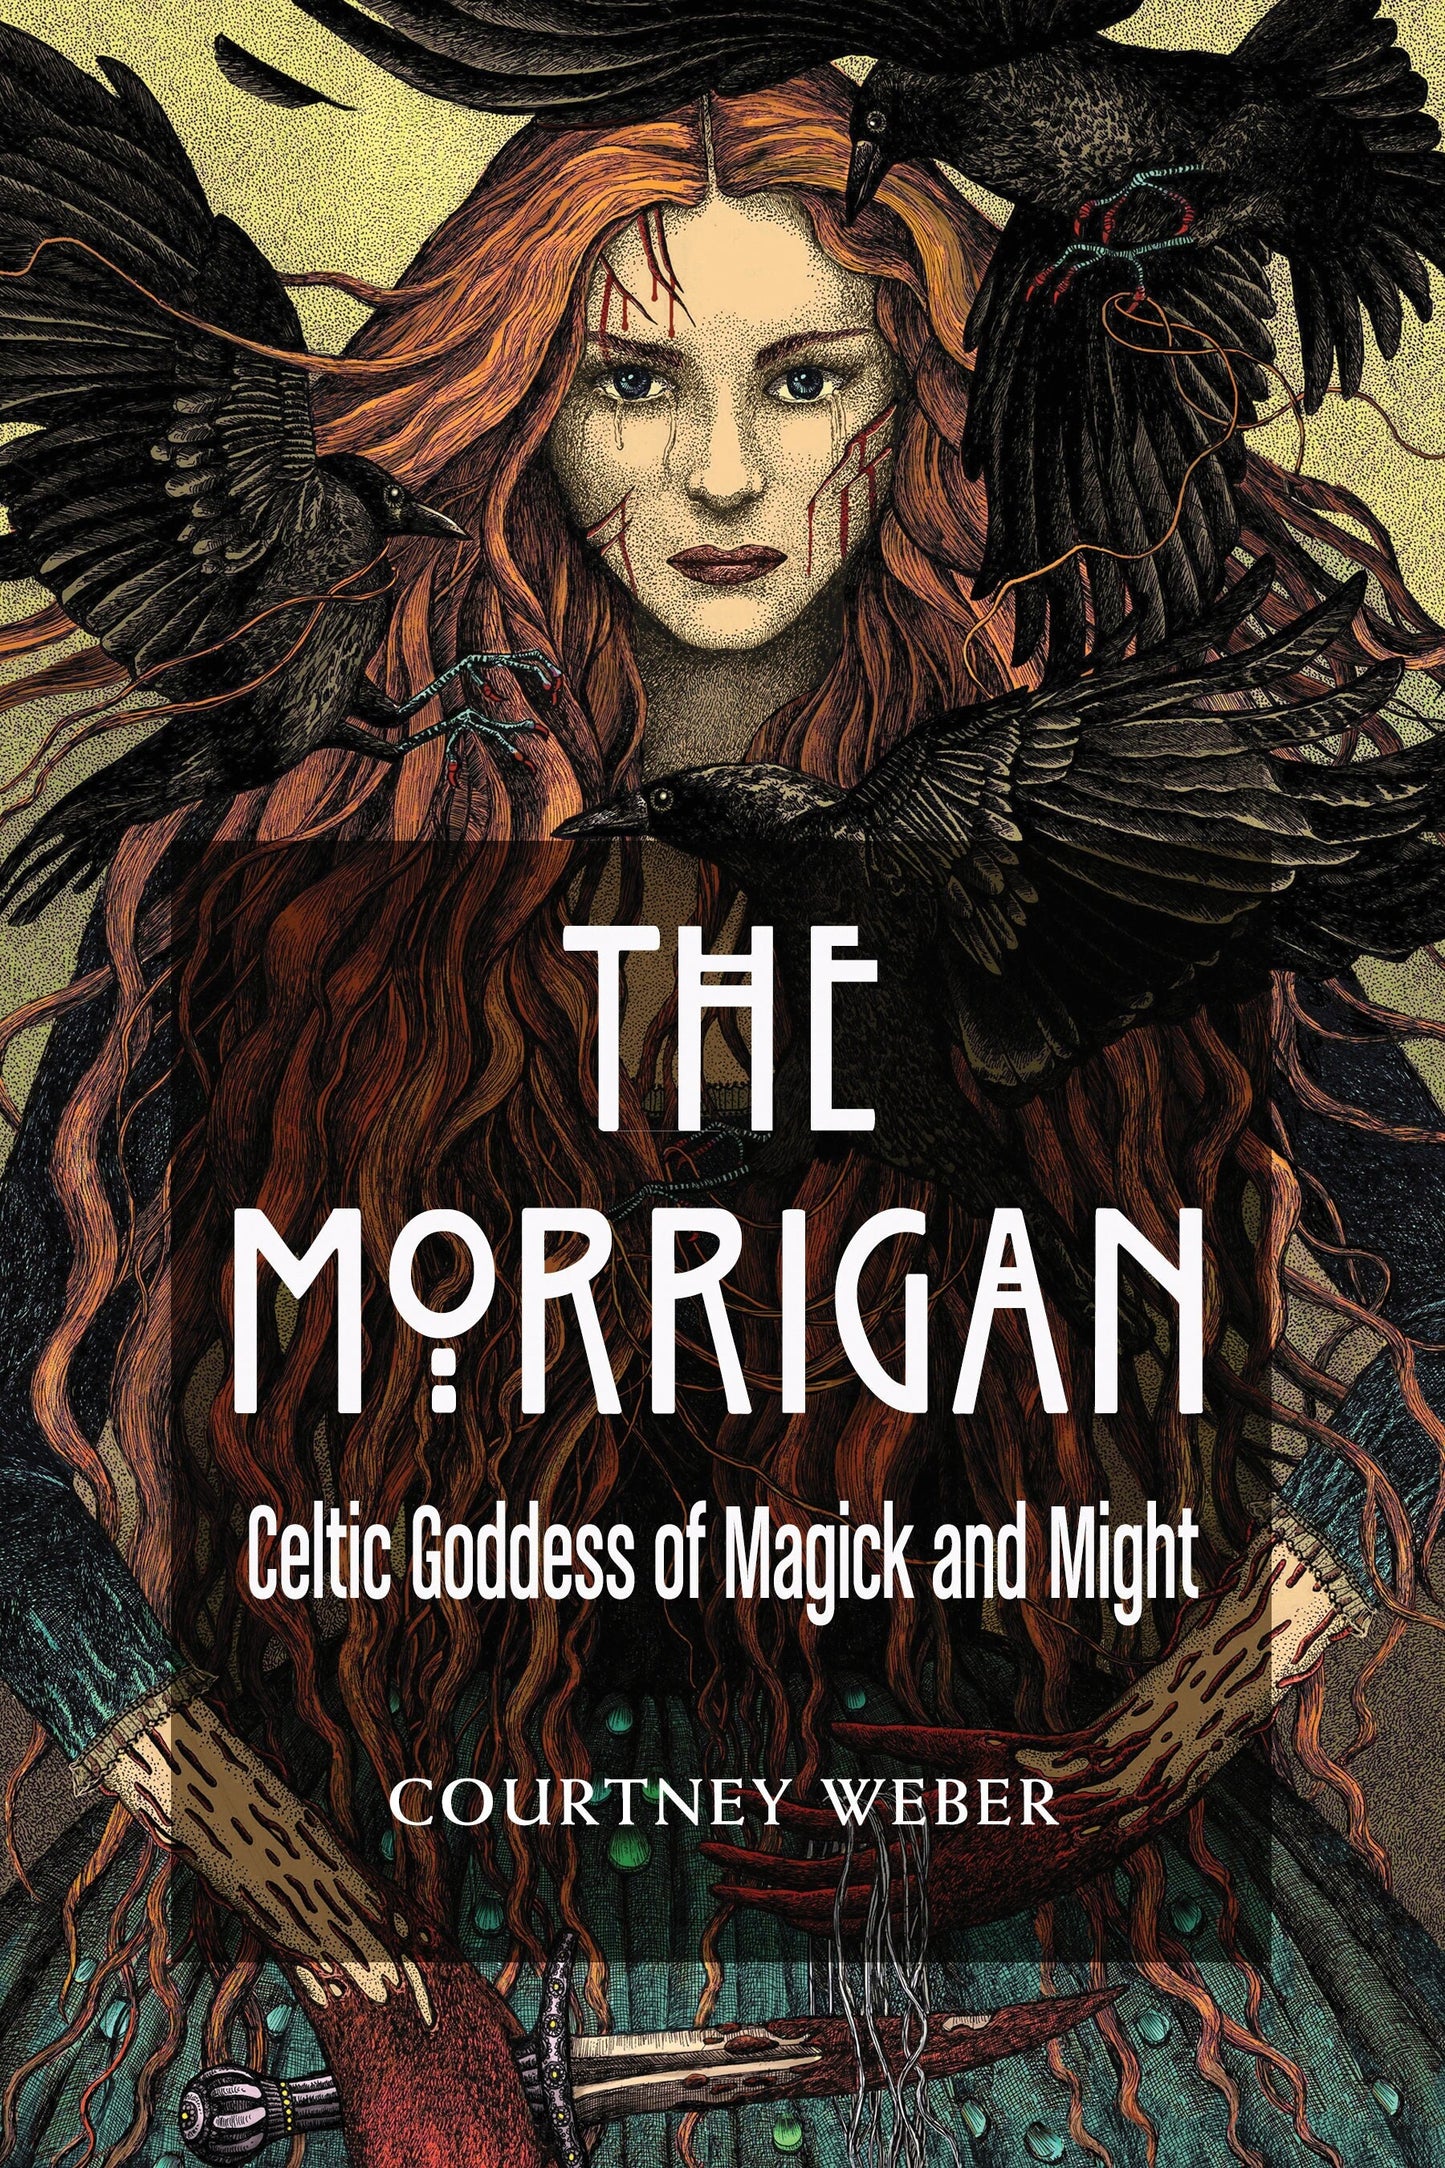 The Morrigan, Celtic Goddess of Magic and Might, by Courtney Weber